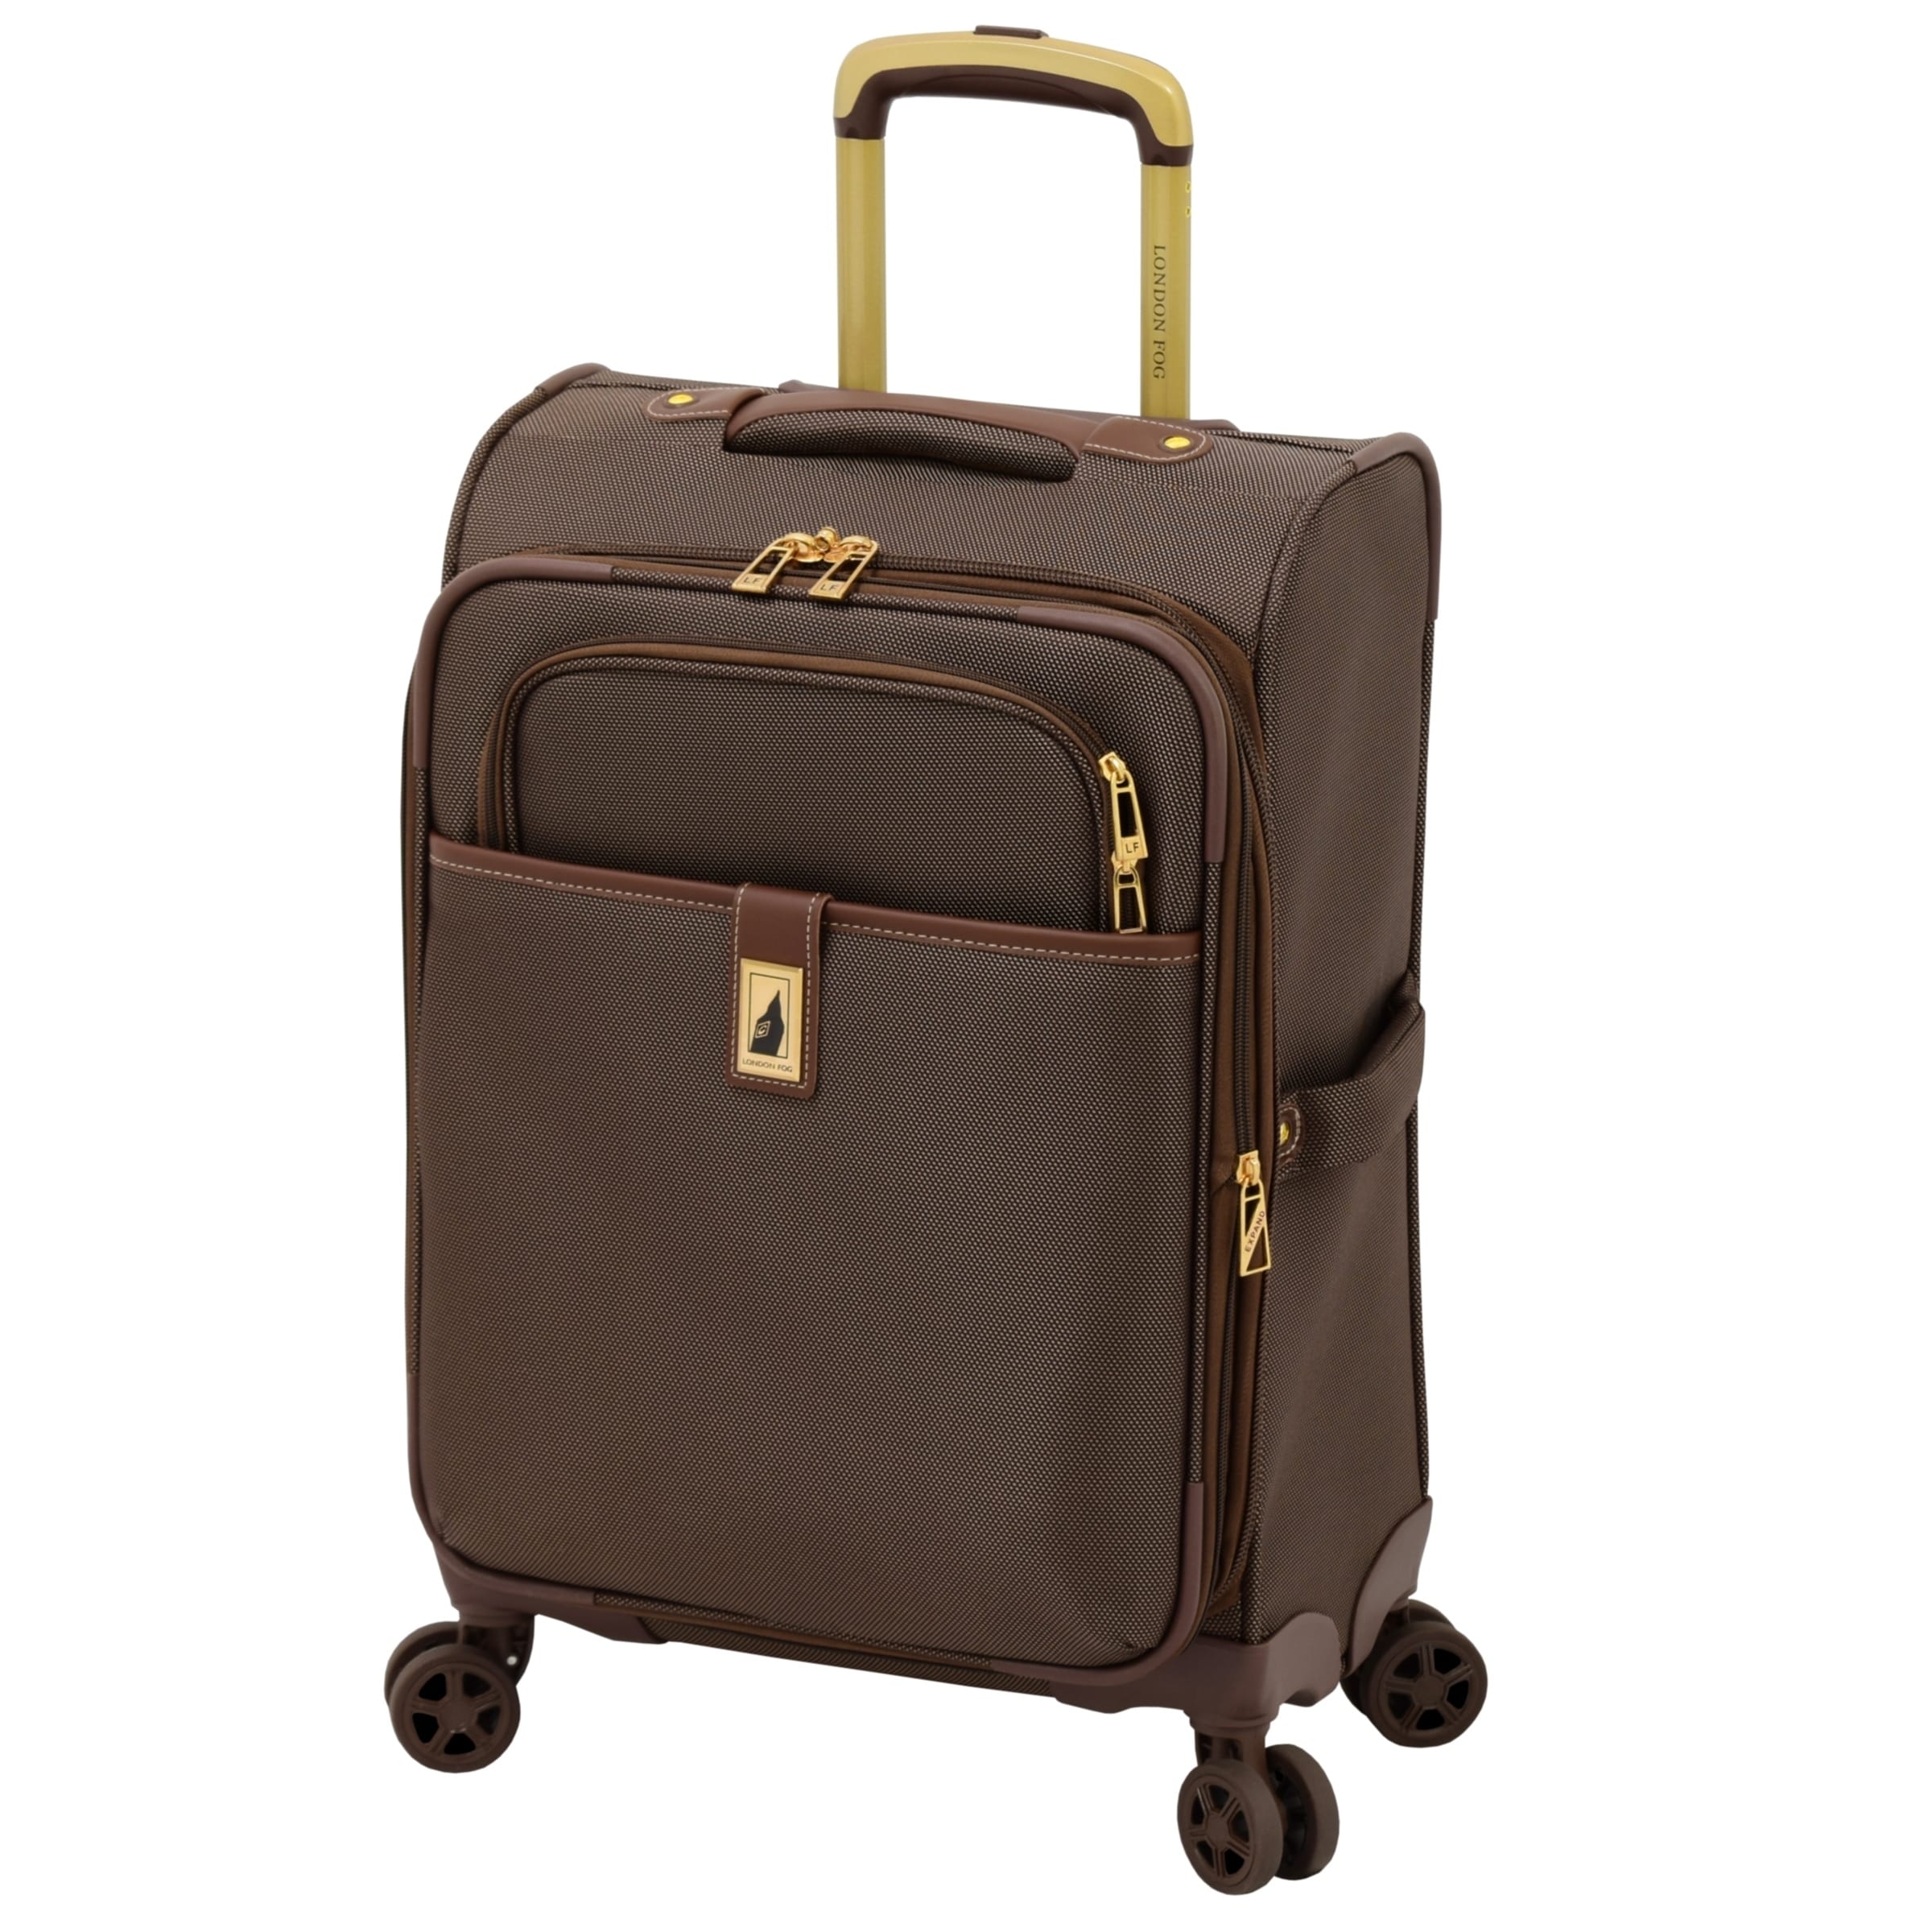 20 x 14 x 9 carry on luggage